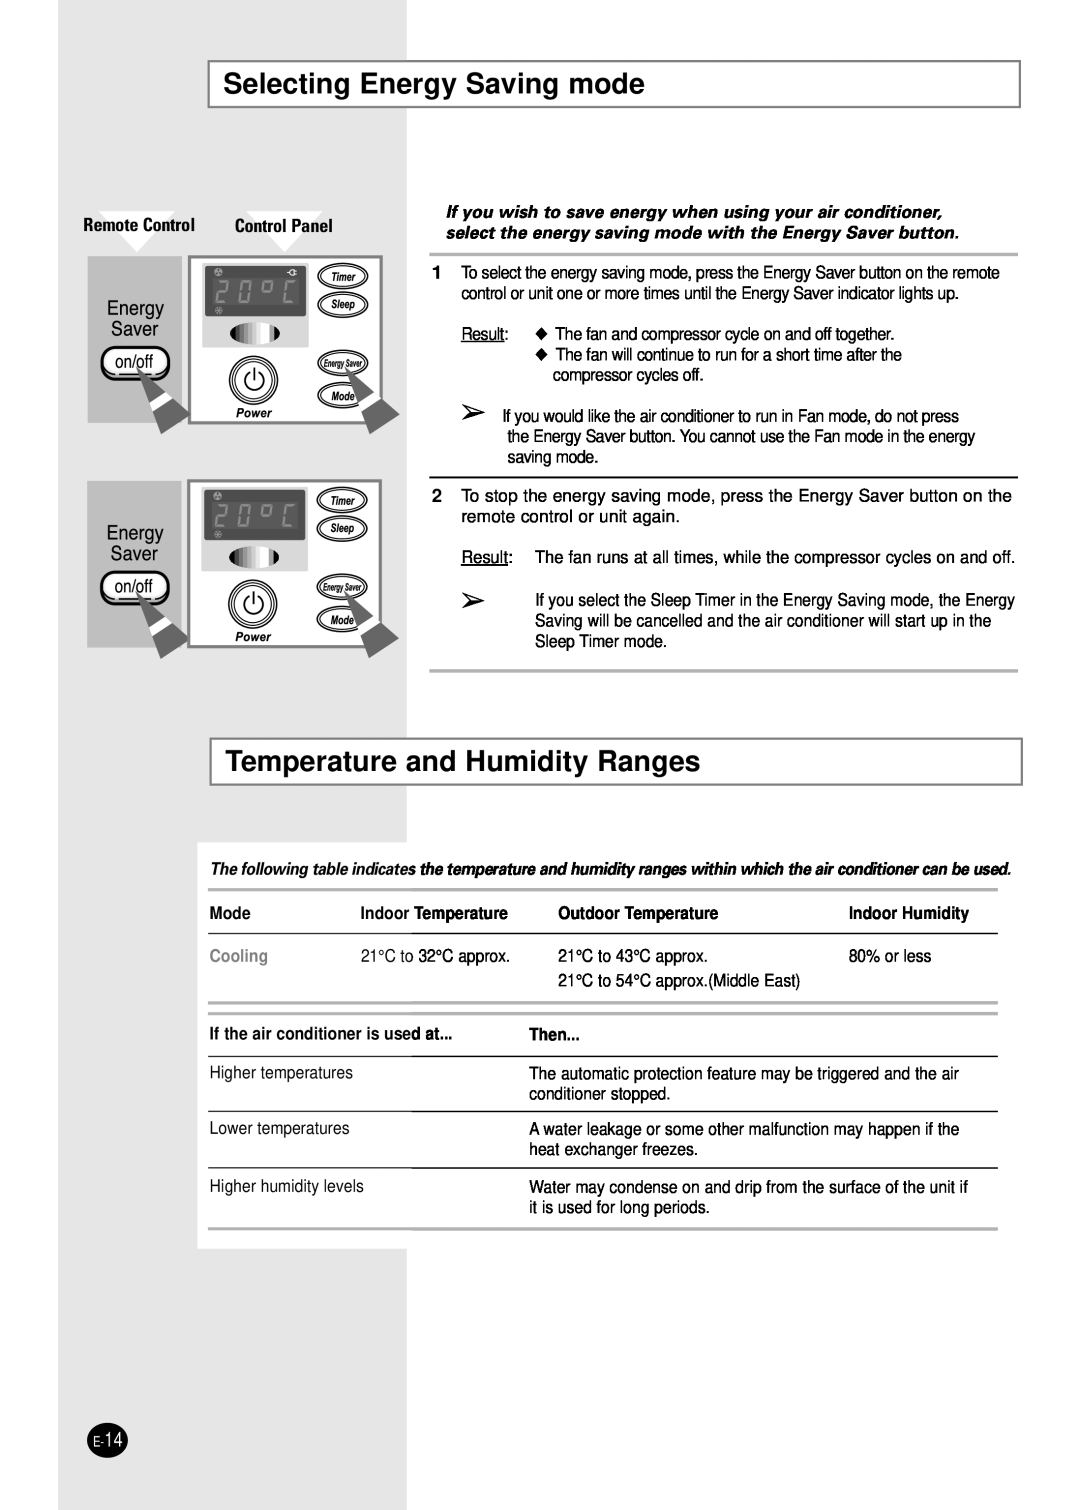 Samsung AWT19FAMBA Selecting Energy Saving mode, Temperature and Humidity Ranges, Remote Control, Control Panel, Cooling 